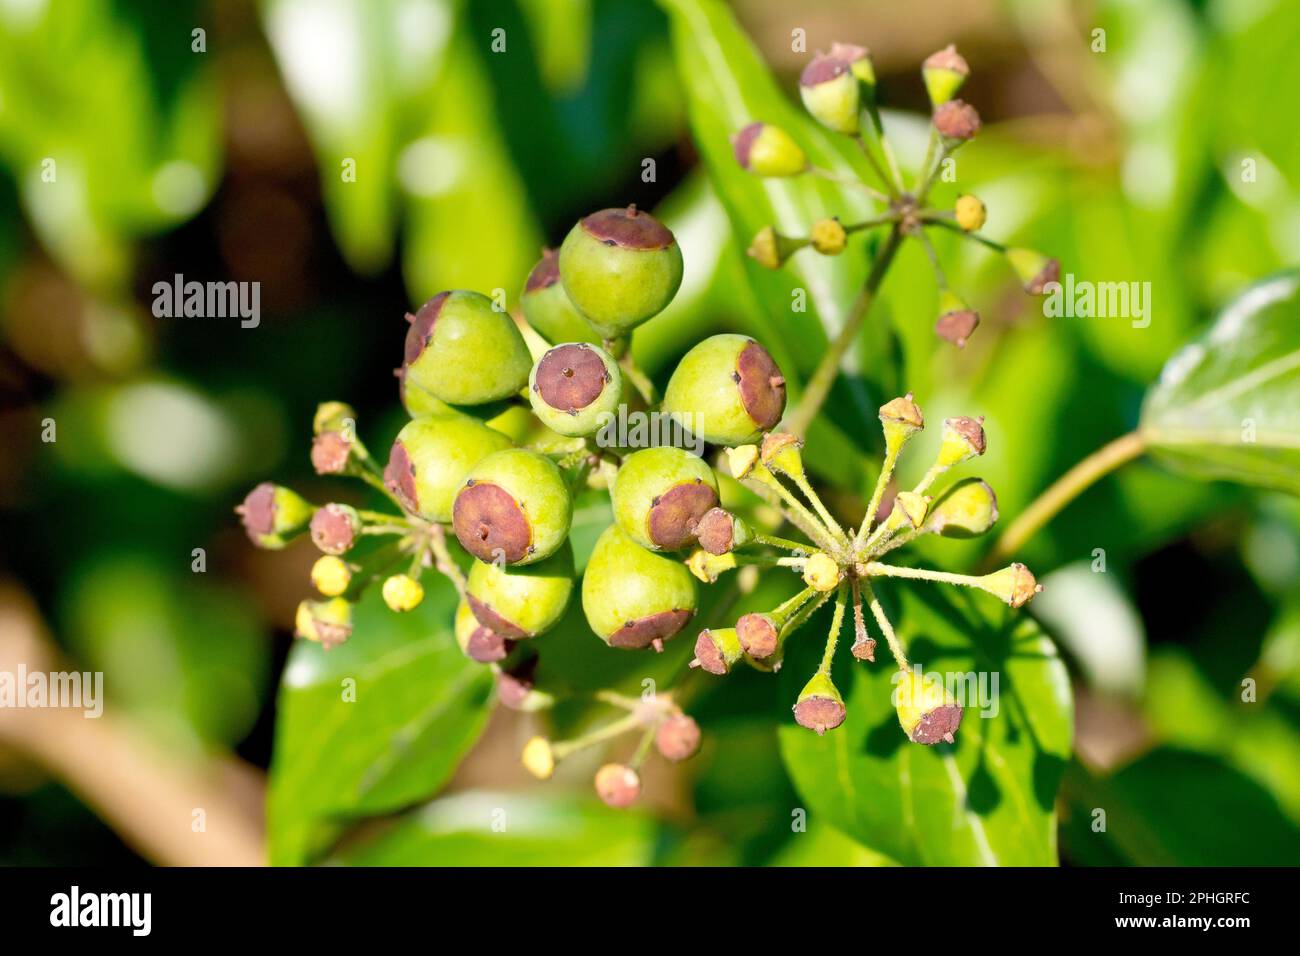 Ivy (hedera helix), close up of a cluster of green, unripe berries produced by the climbing shrub in the early part of spring. Stock Photo